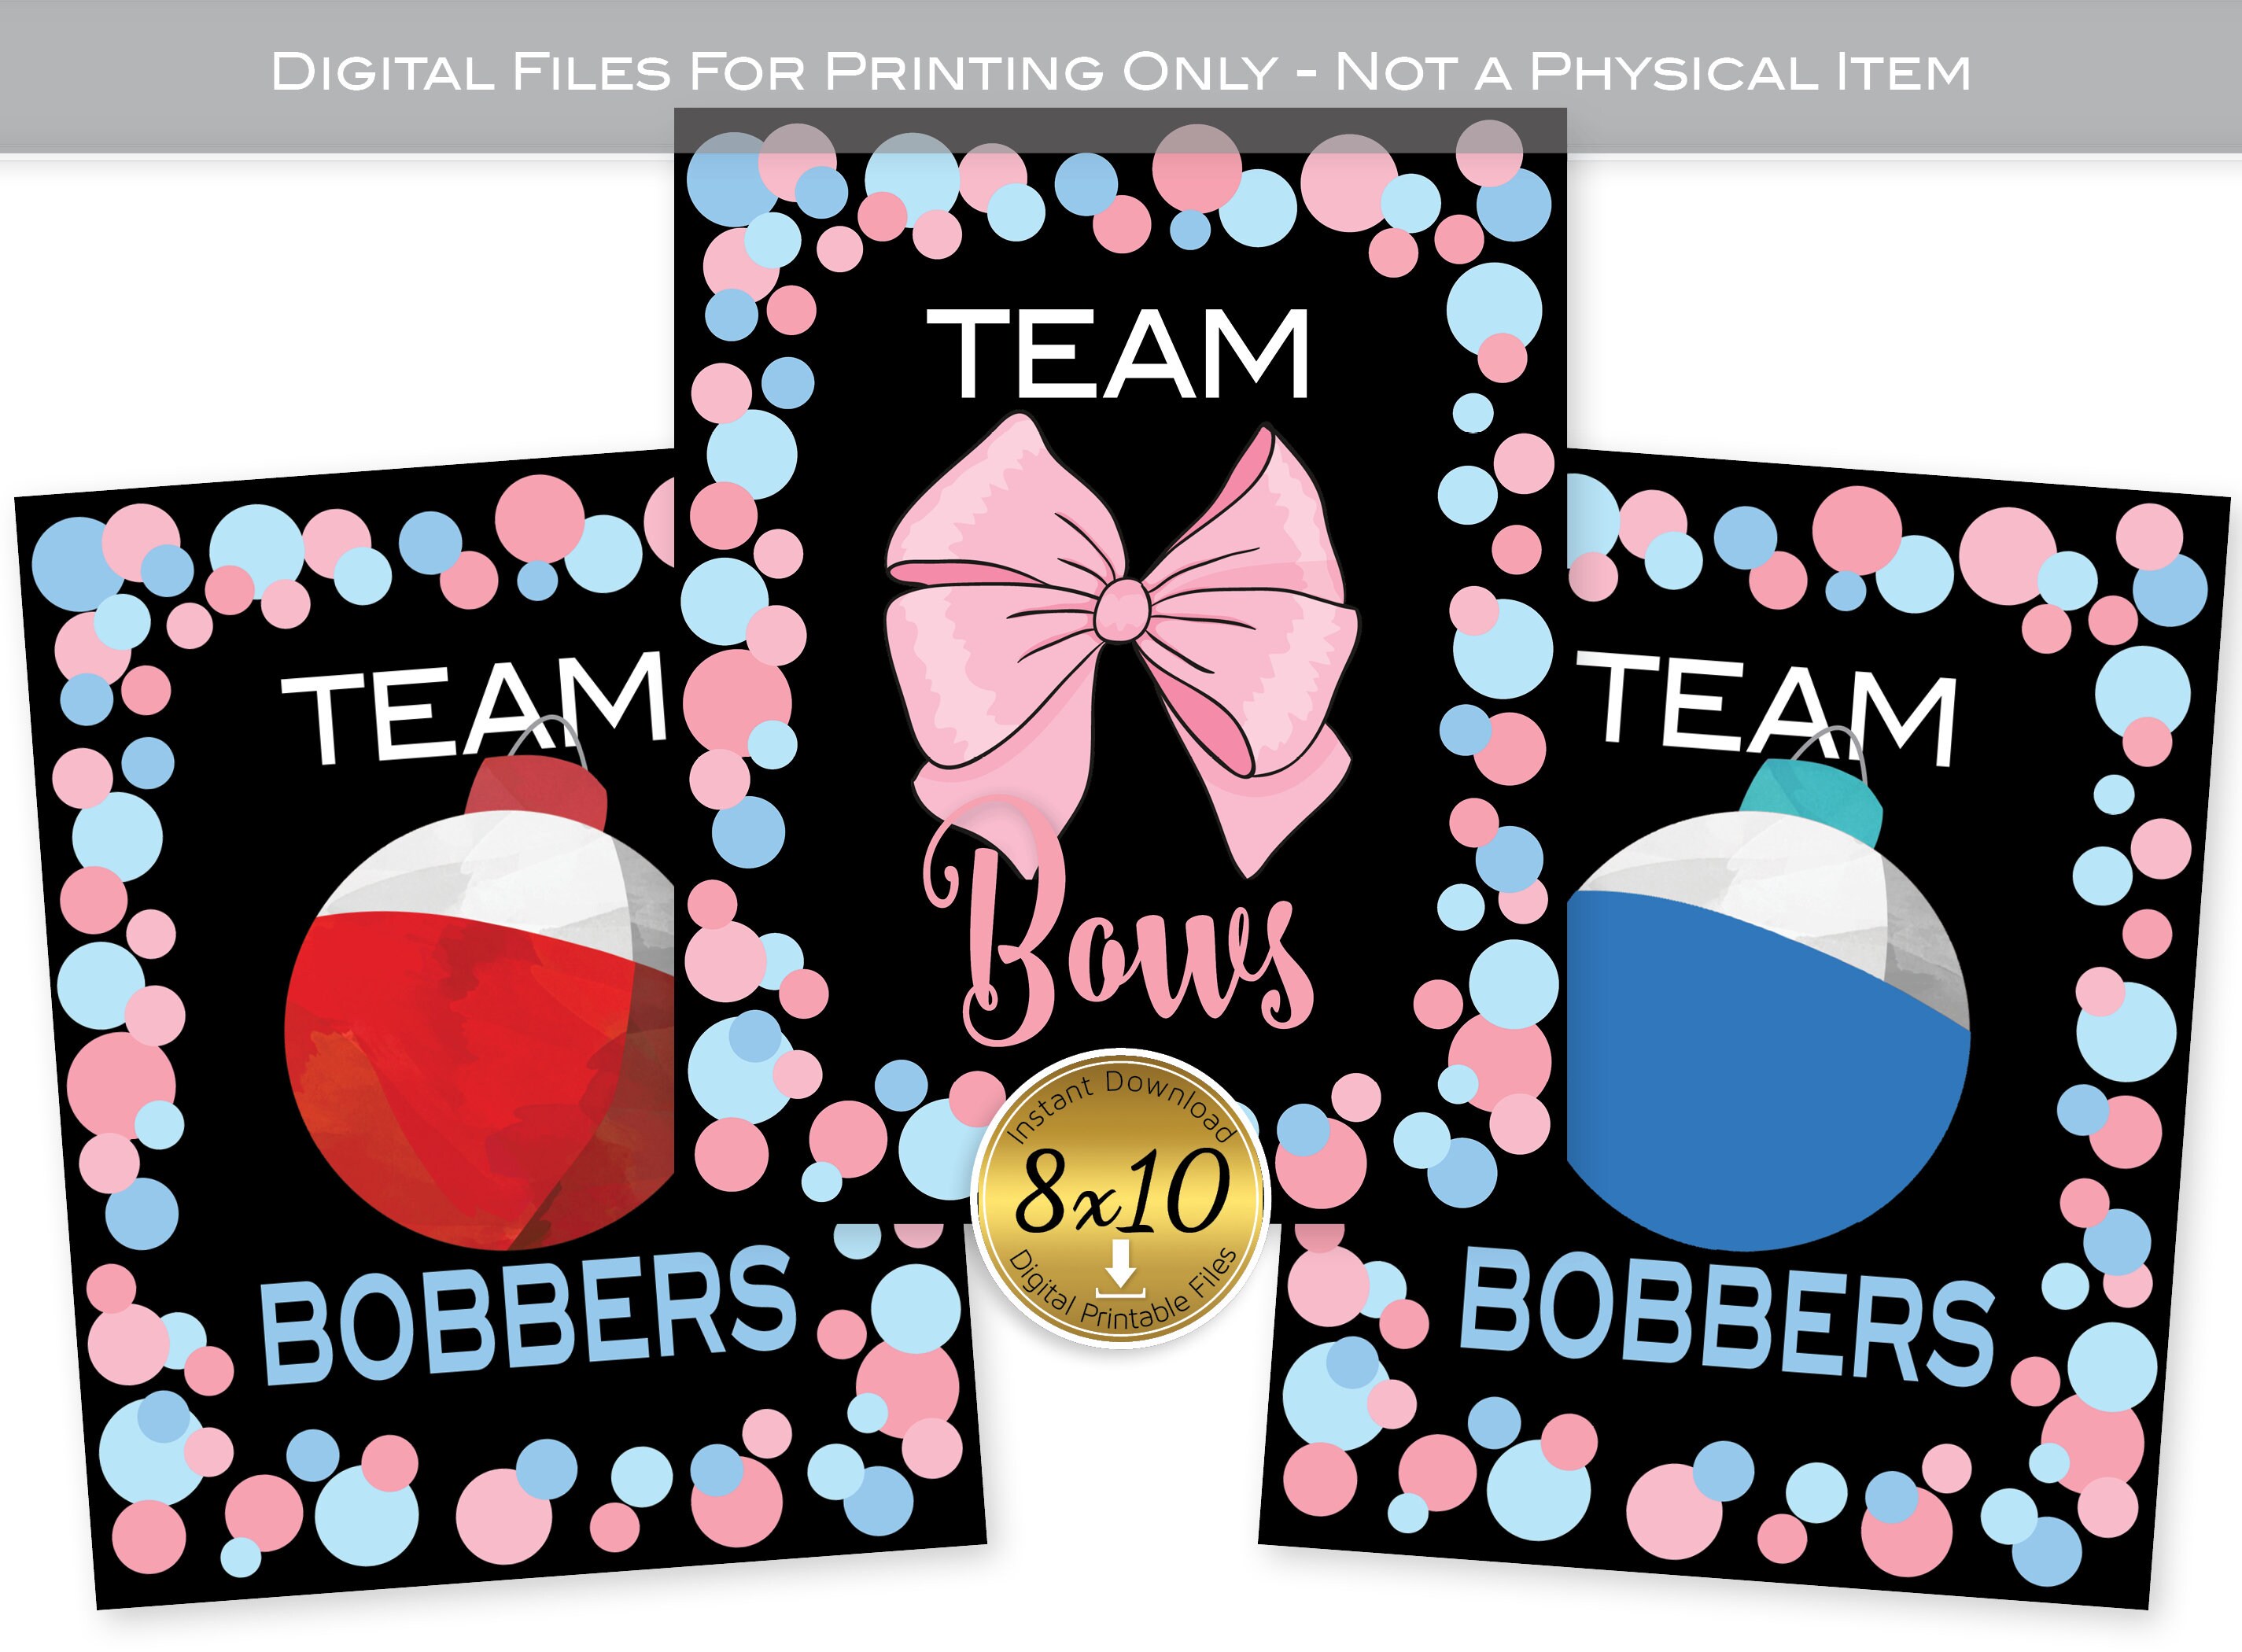 Big Dot Of Happiness Par-tee Time - Golf - Square Favor Gift Boxes -  Birthday Or Retirement Party Bow Boxes - Set Of 12 : Target